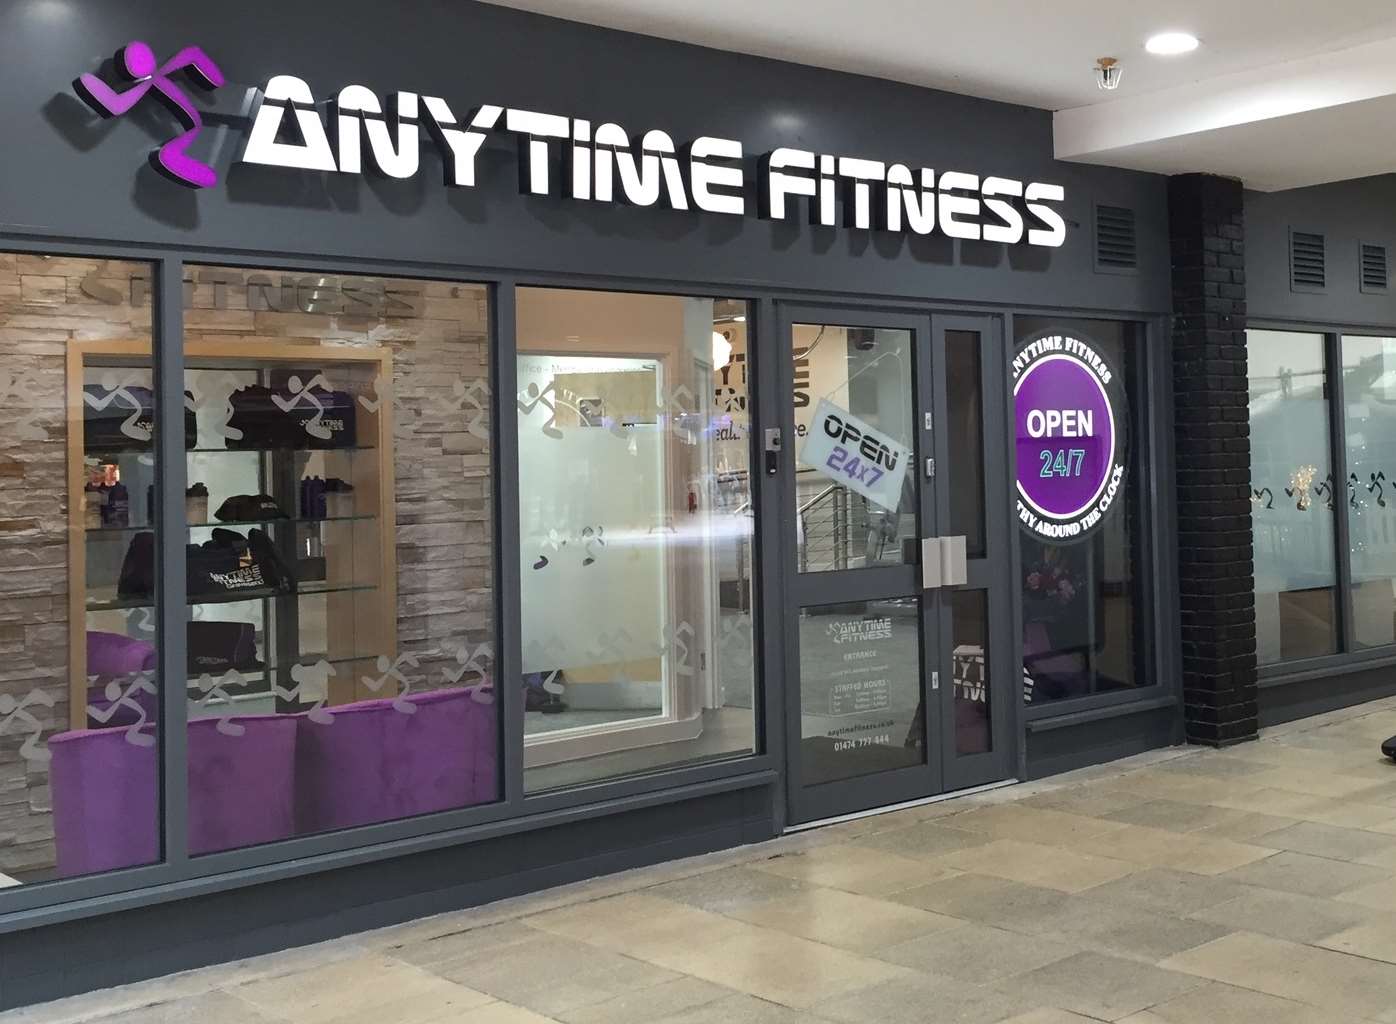 A new 24-hour gym opened in the St George’s Shopping Centre